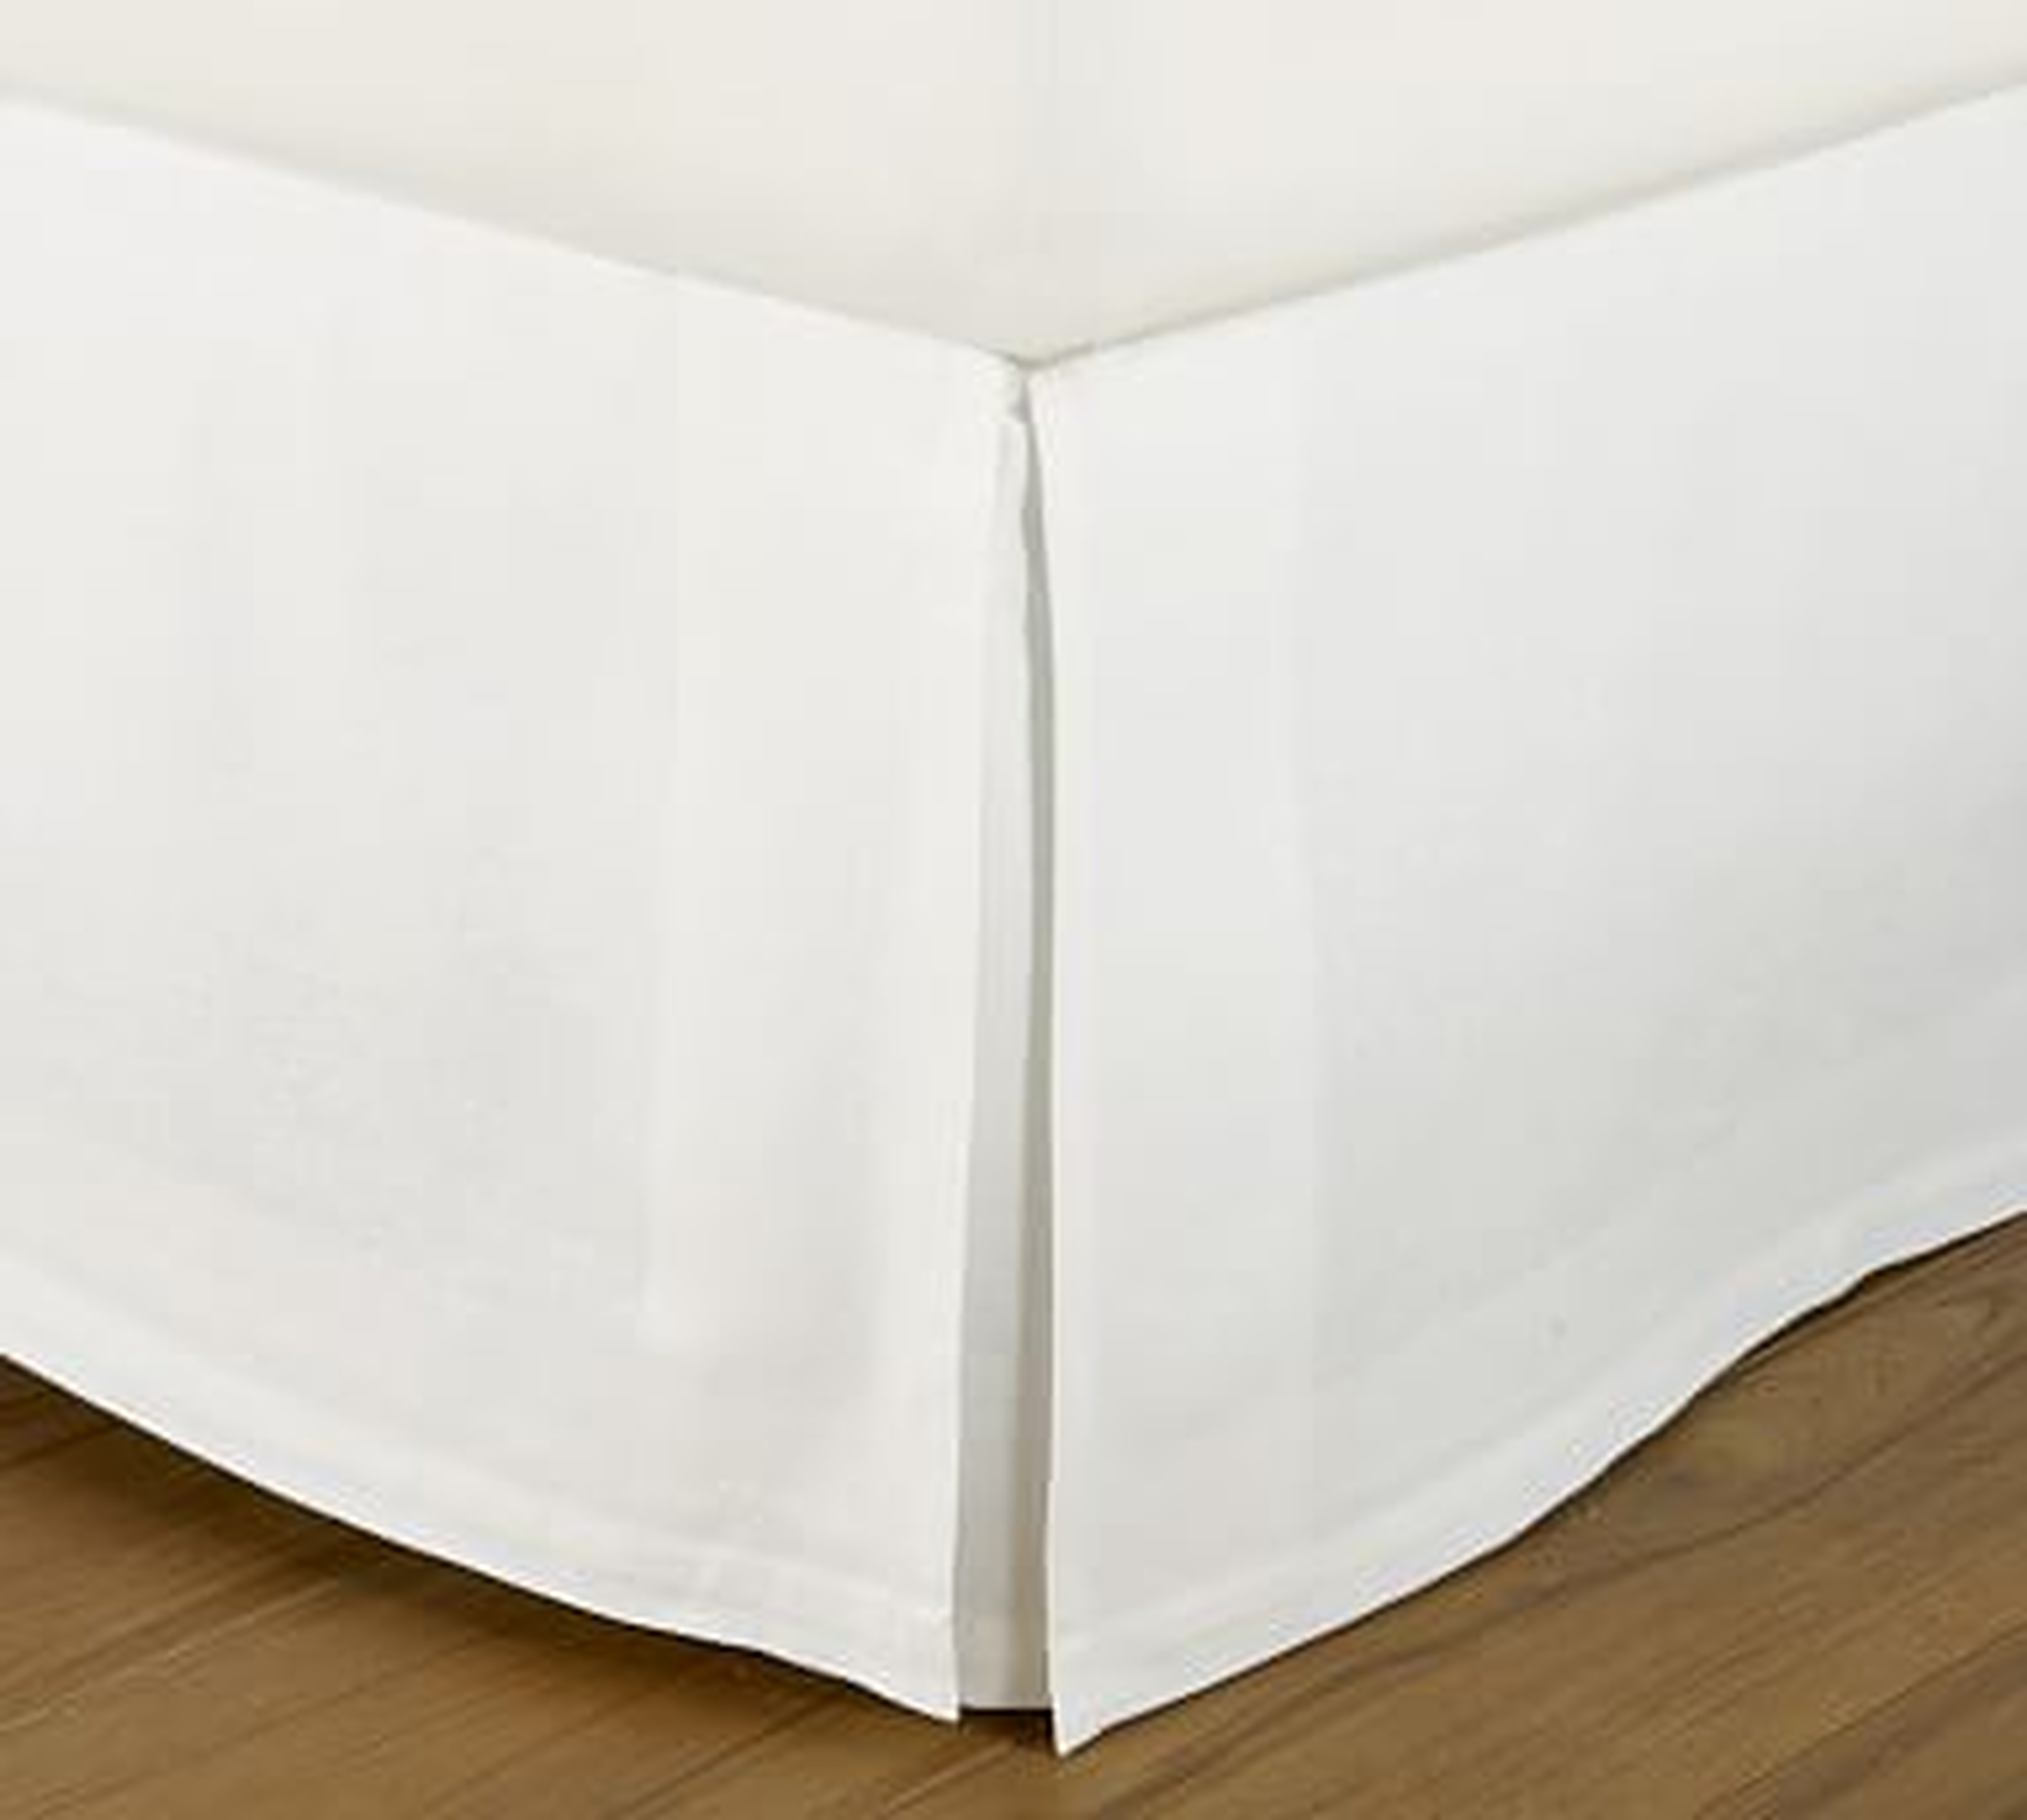 Essential Linen & Cotton Bed Skirt, 18" Drop, Queen, White - Pottery Barn